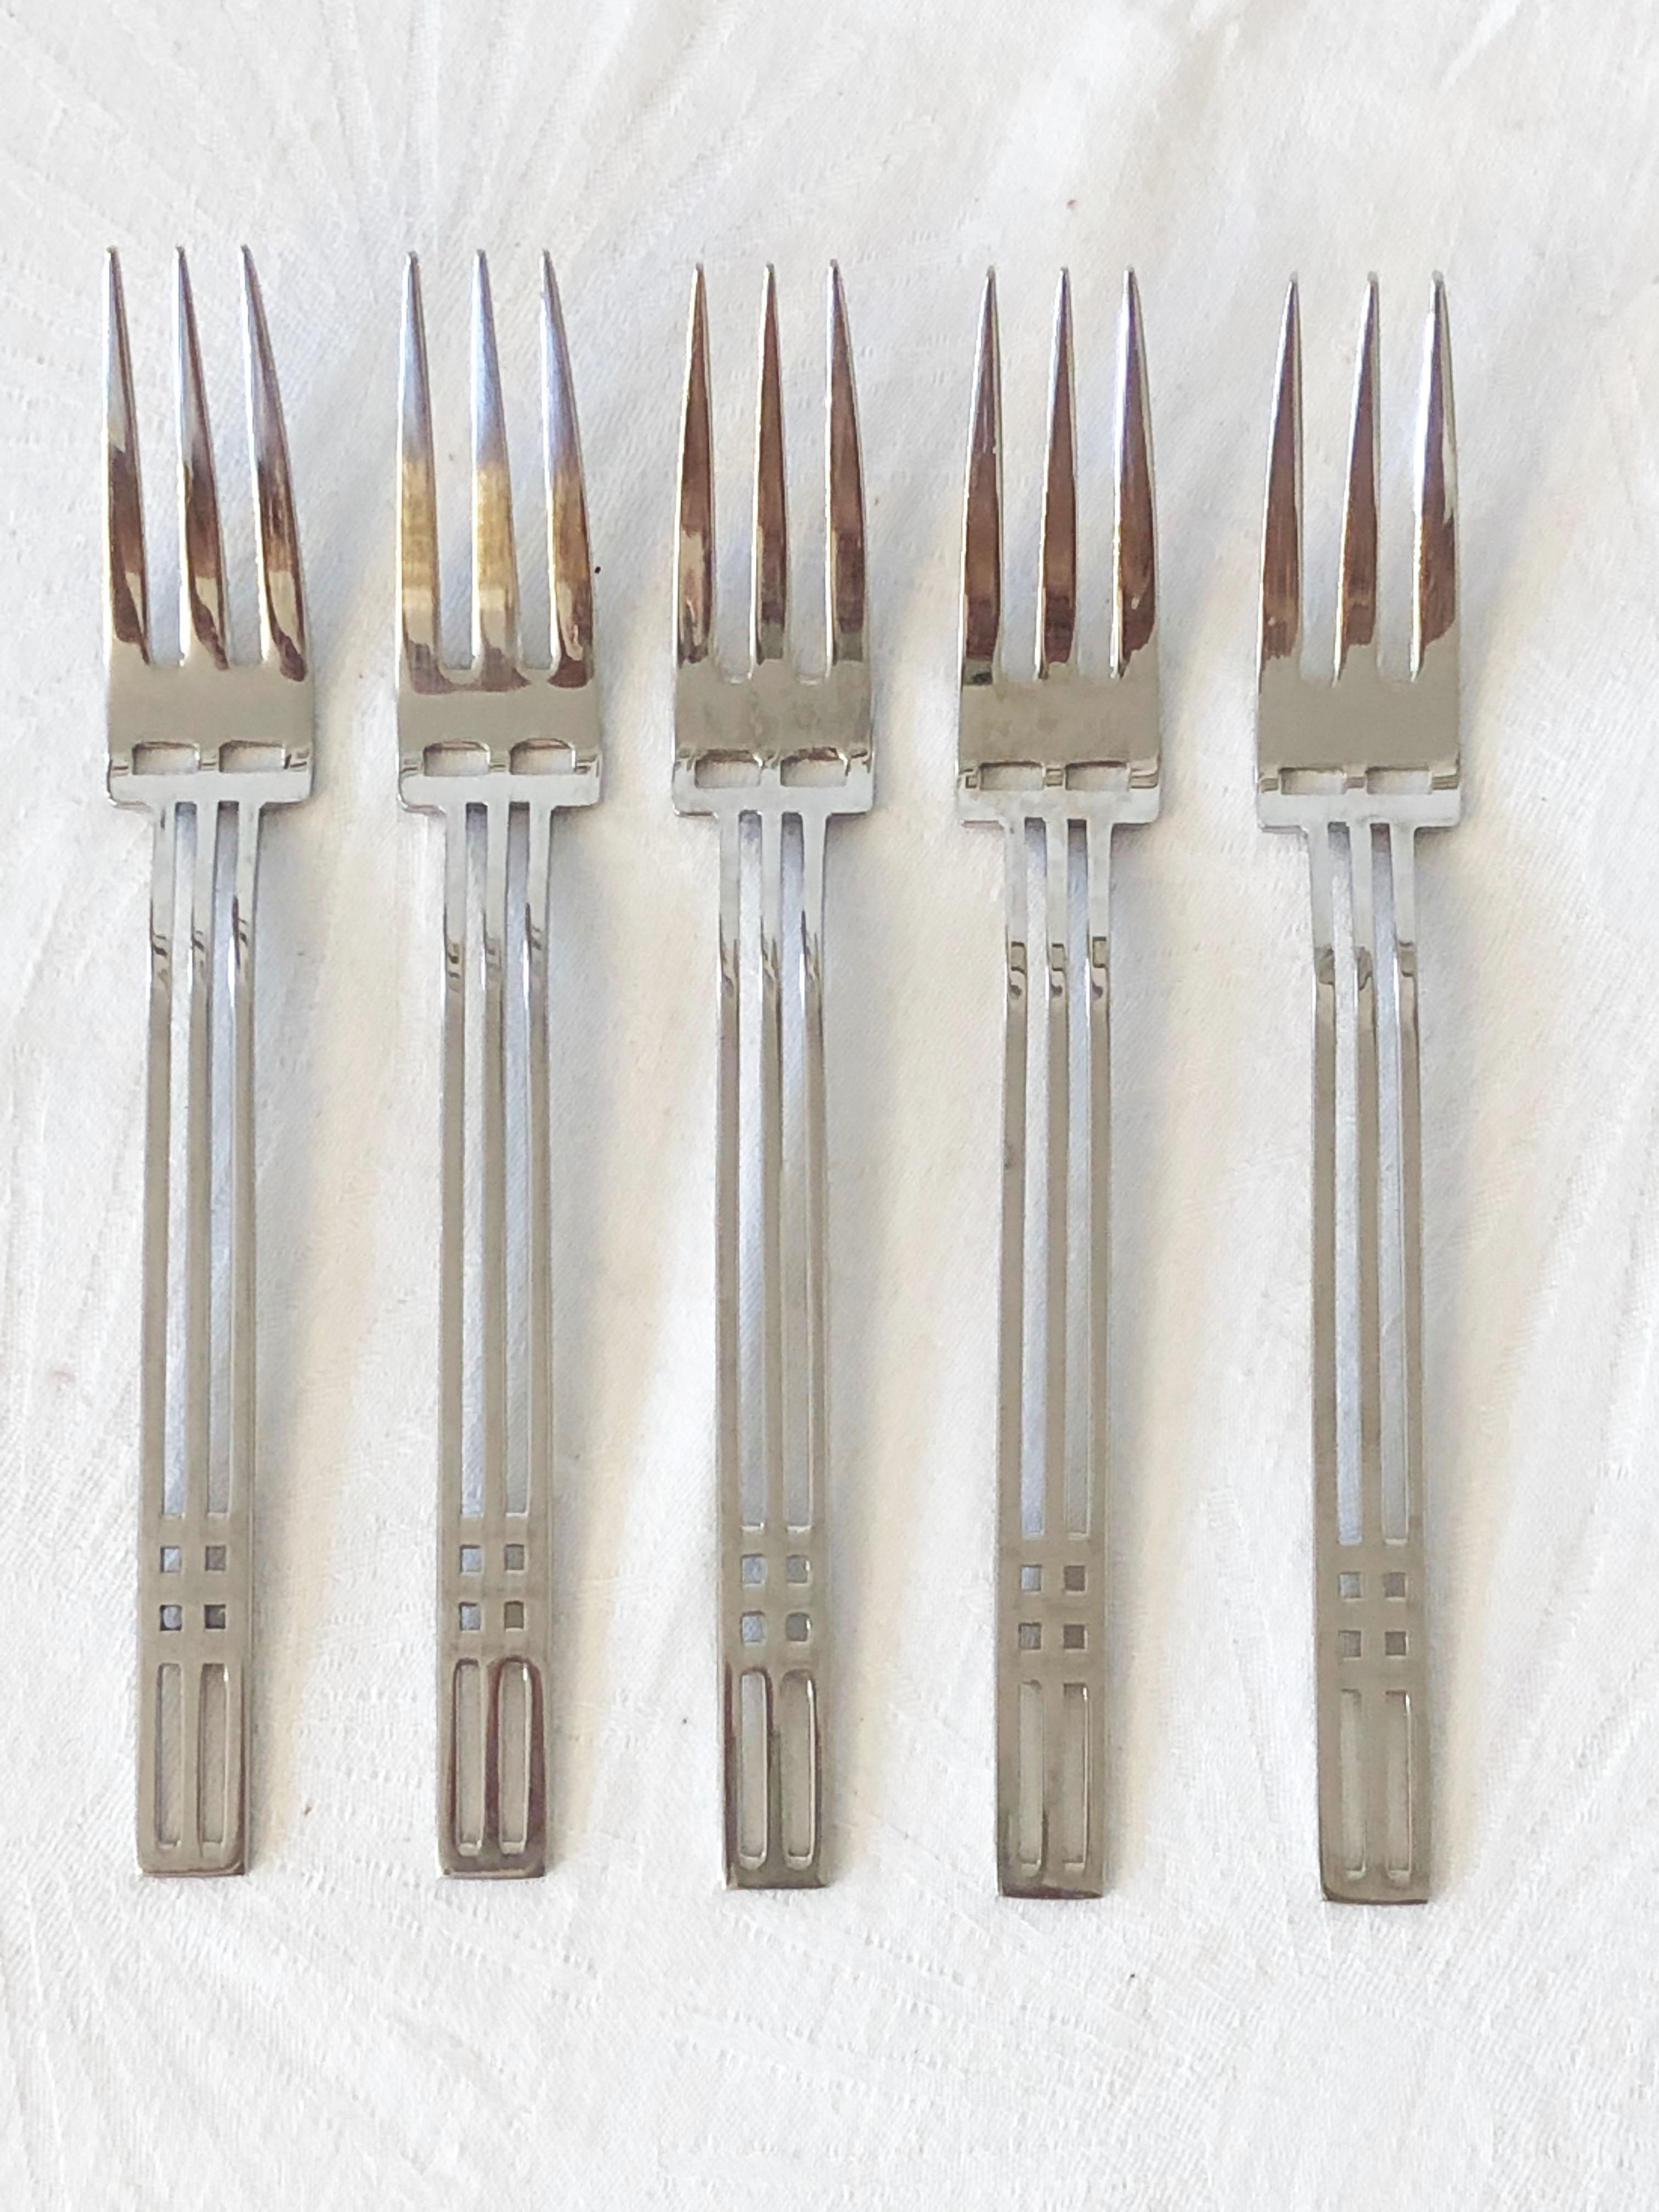 Rare Berndorf Cutlery, Fratware 'Windows 1800' In Good Condition For Sale In Vienna, AT